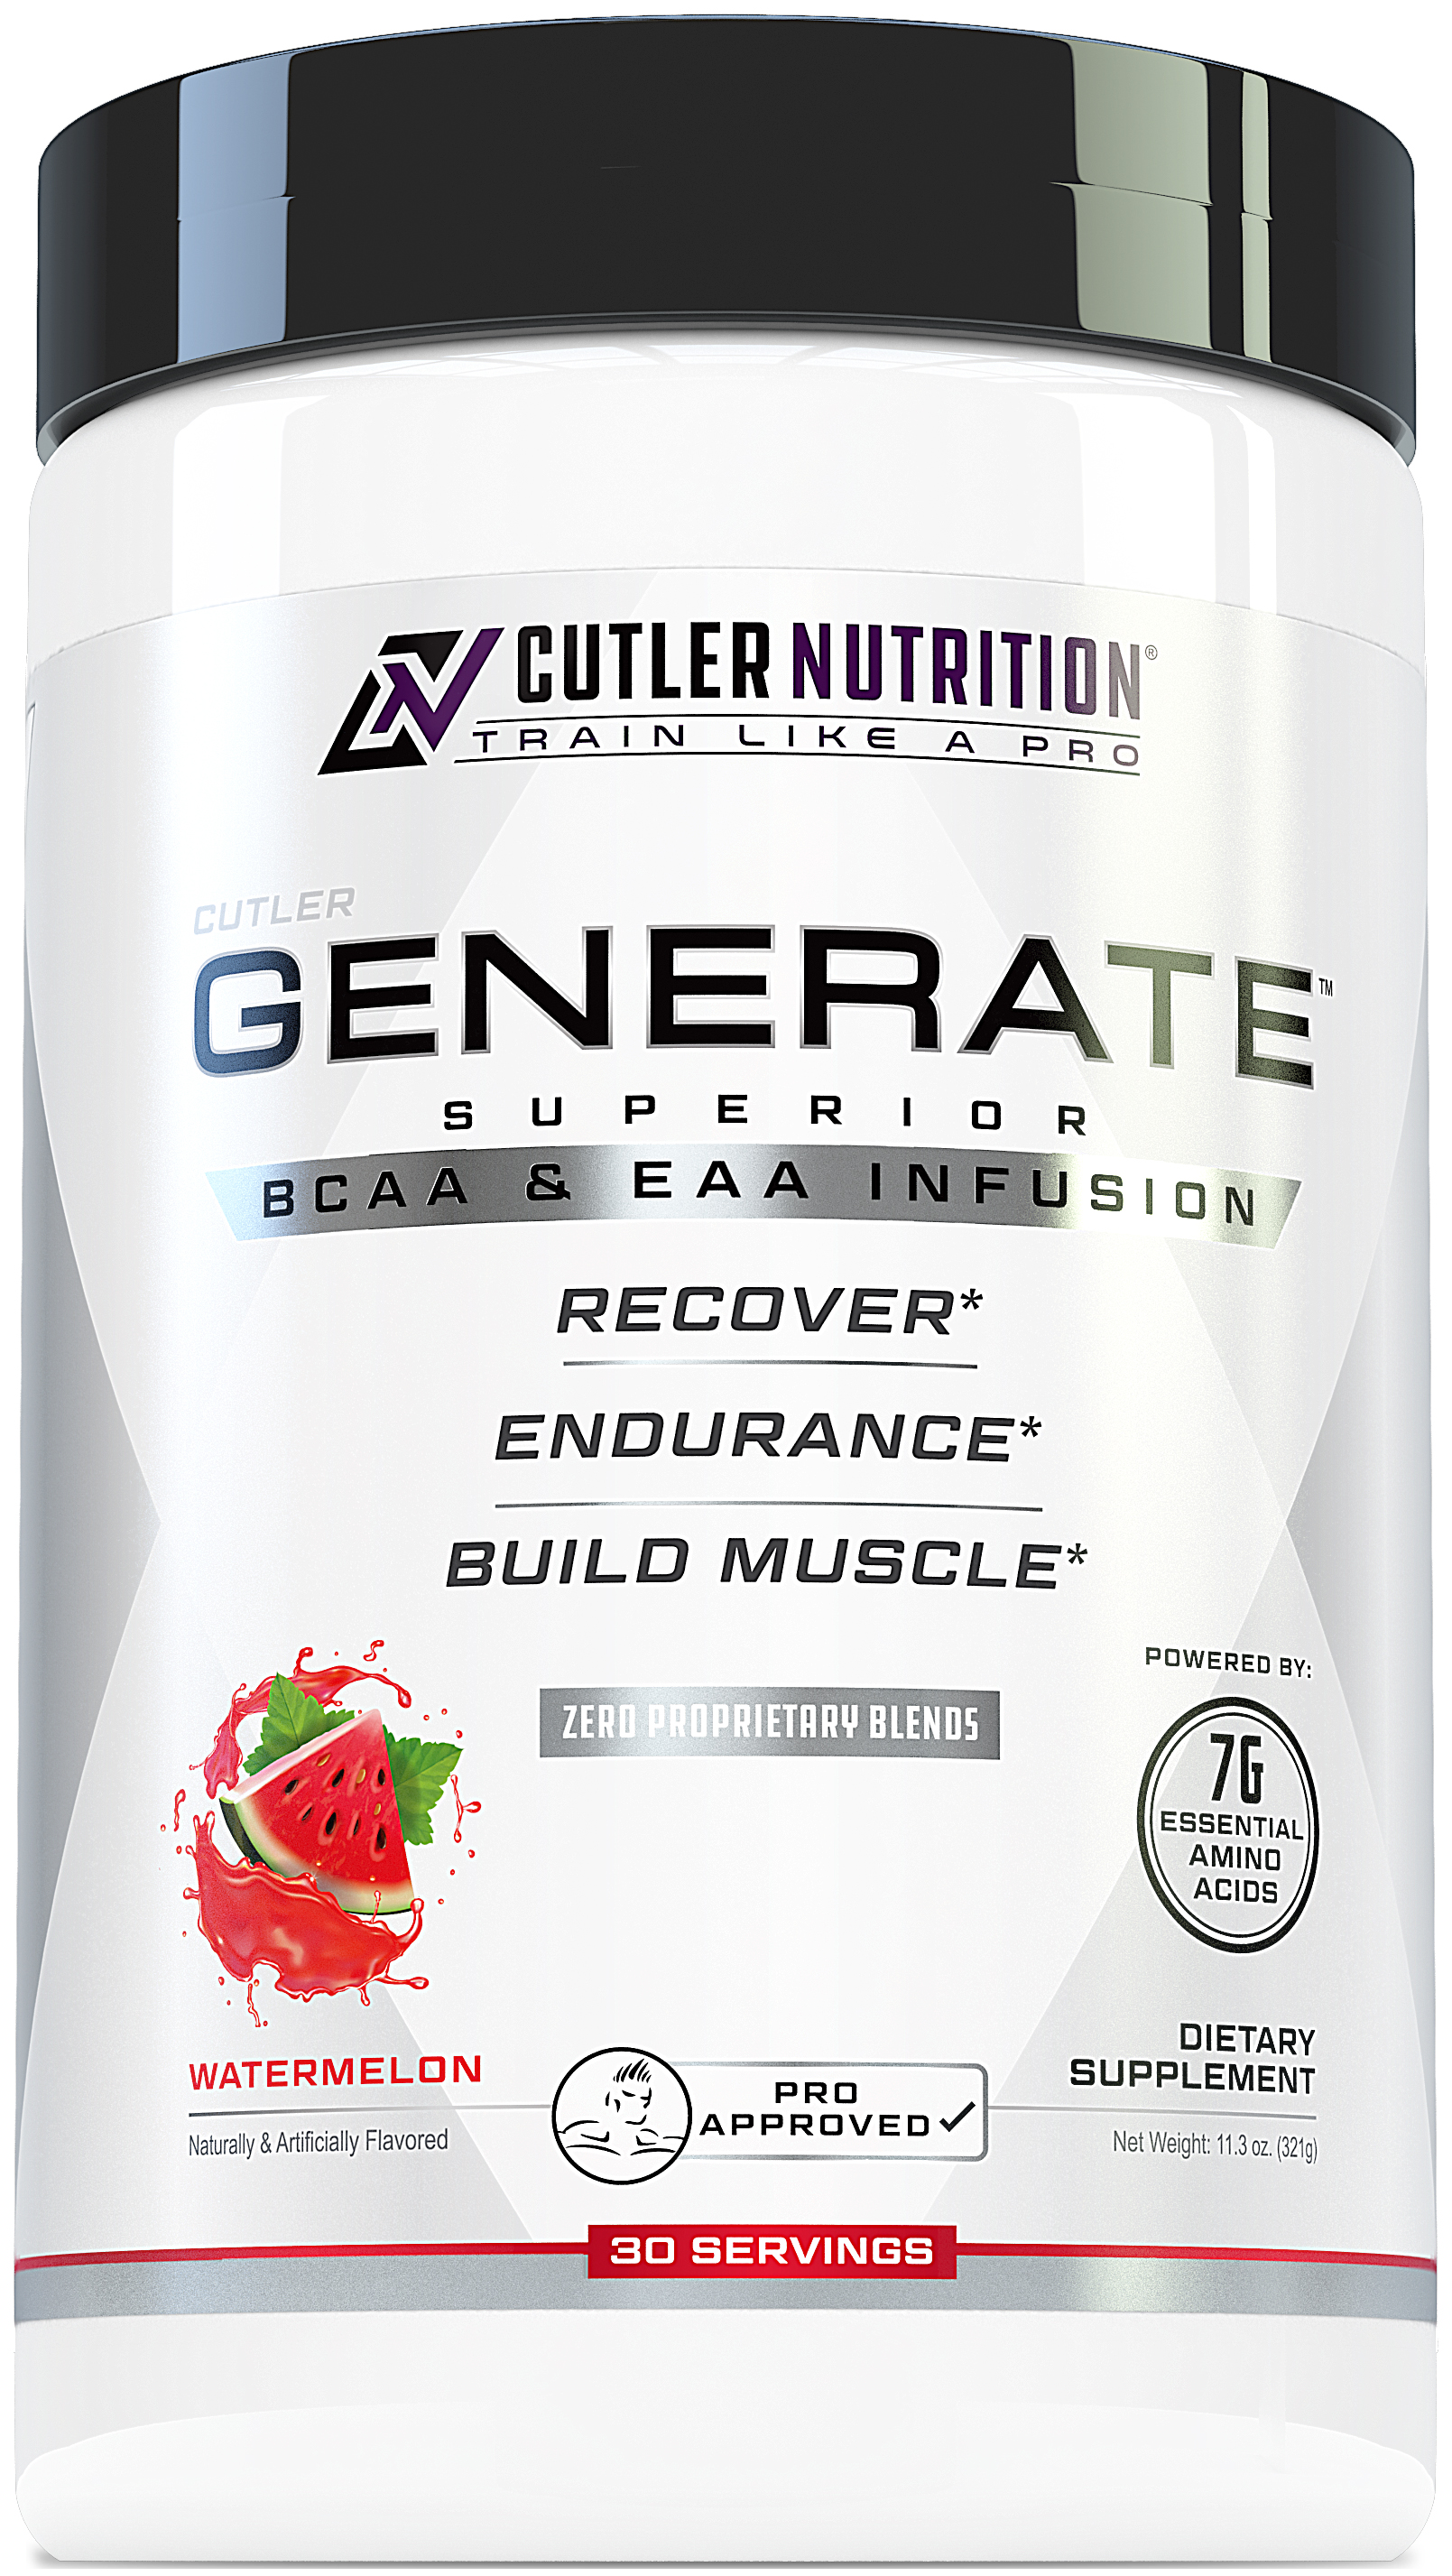 Cutler Nutrition Ultimate BCAA EAAs Amino Acids Powder Generate Post Workout Recovery Drink Mix with 5g BCAA Powder and 2g Essential Amino Acids for Muscle Recovery | Juicy Watermelon (30 SVG)